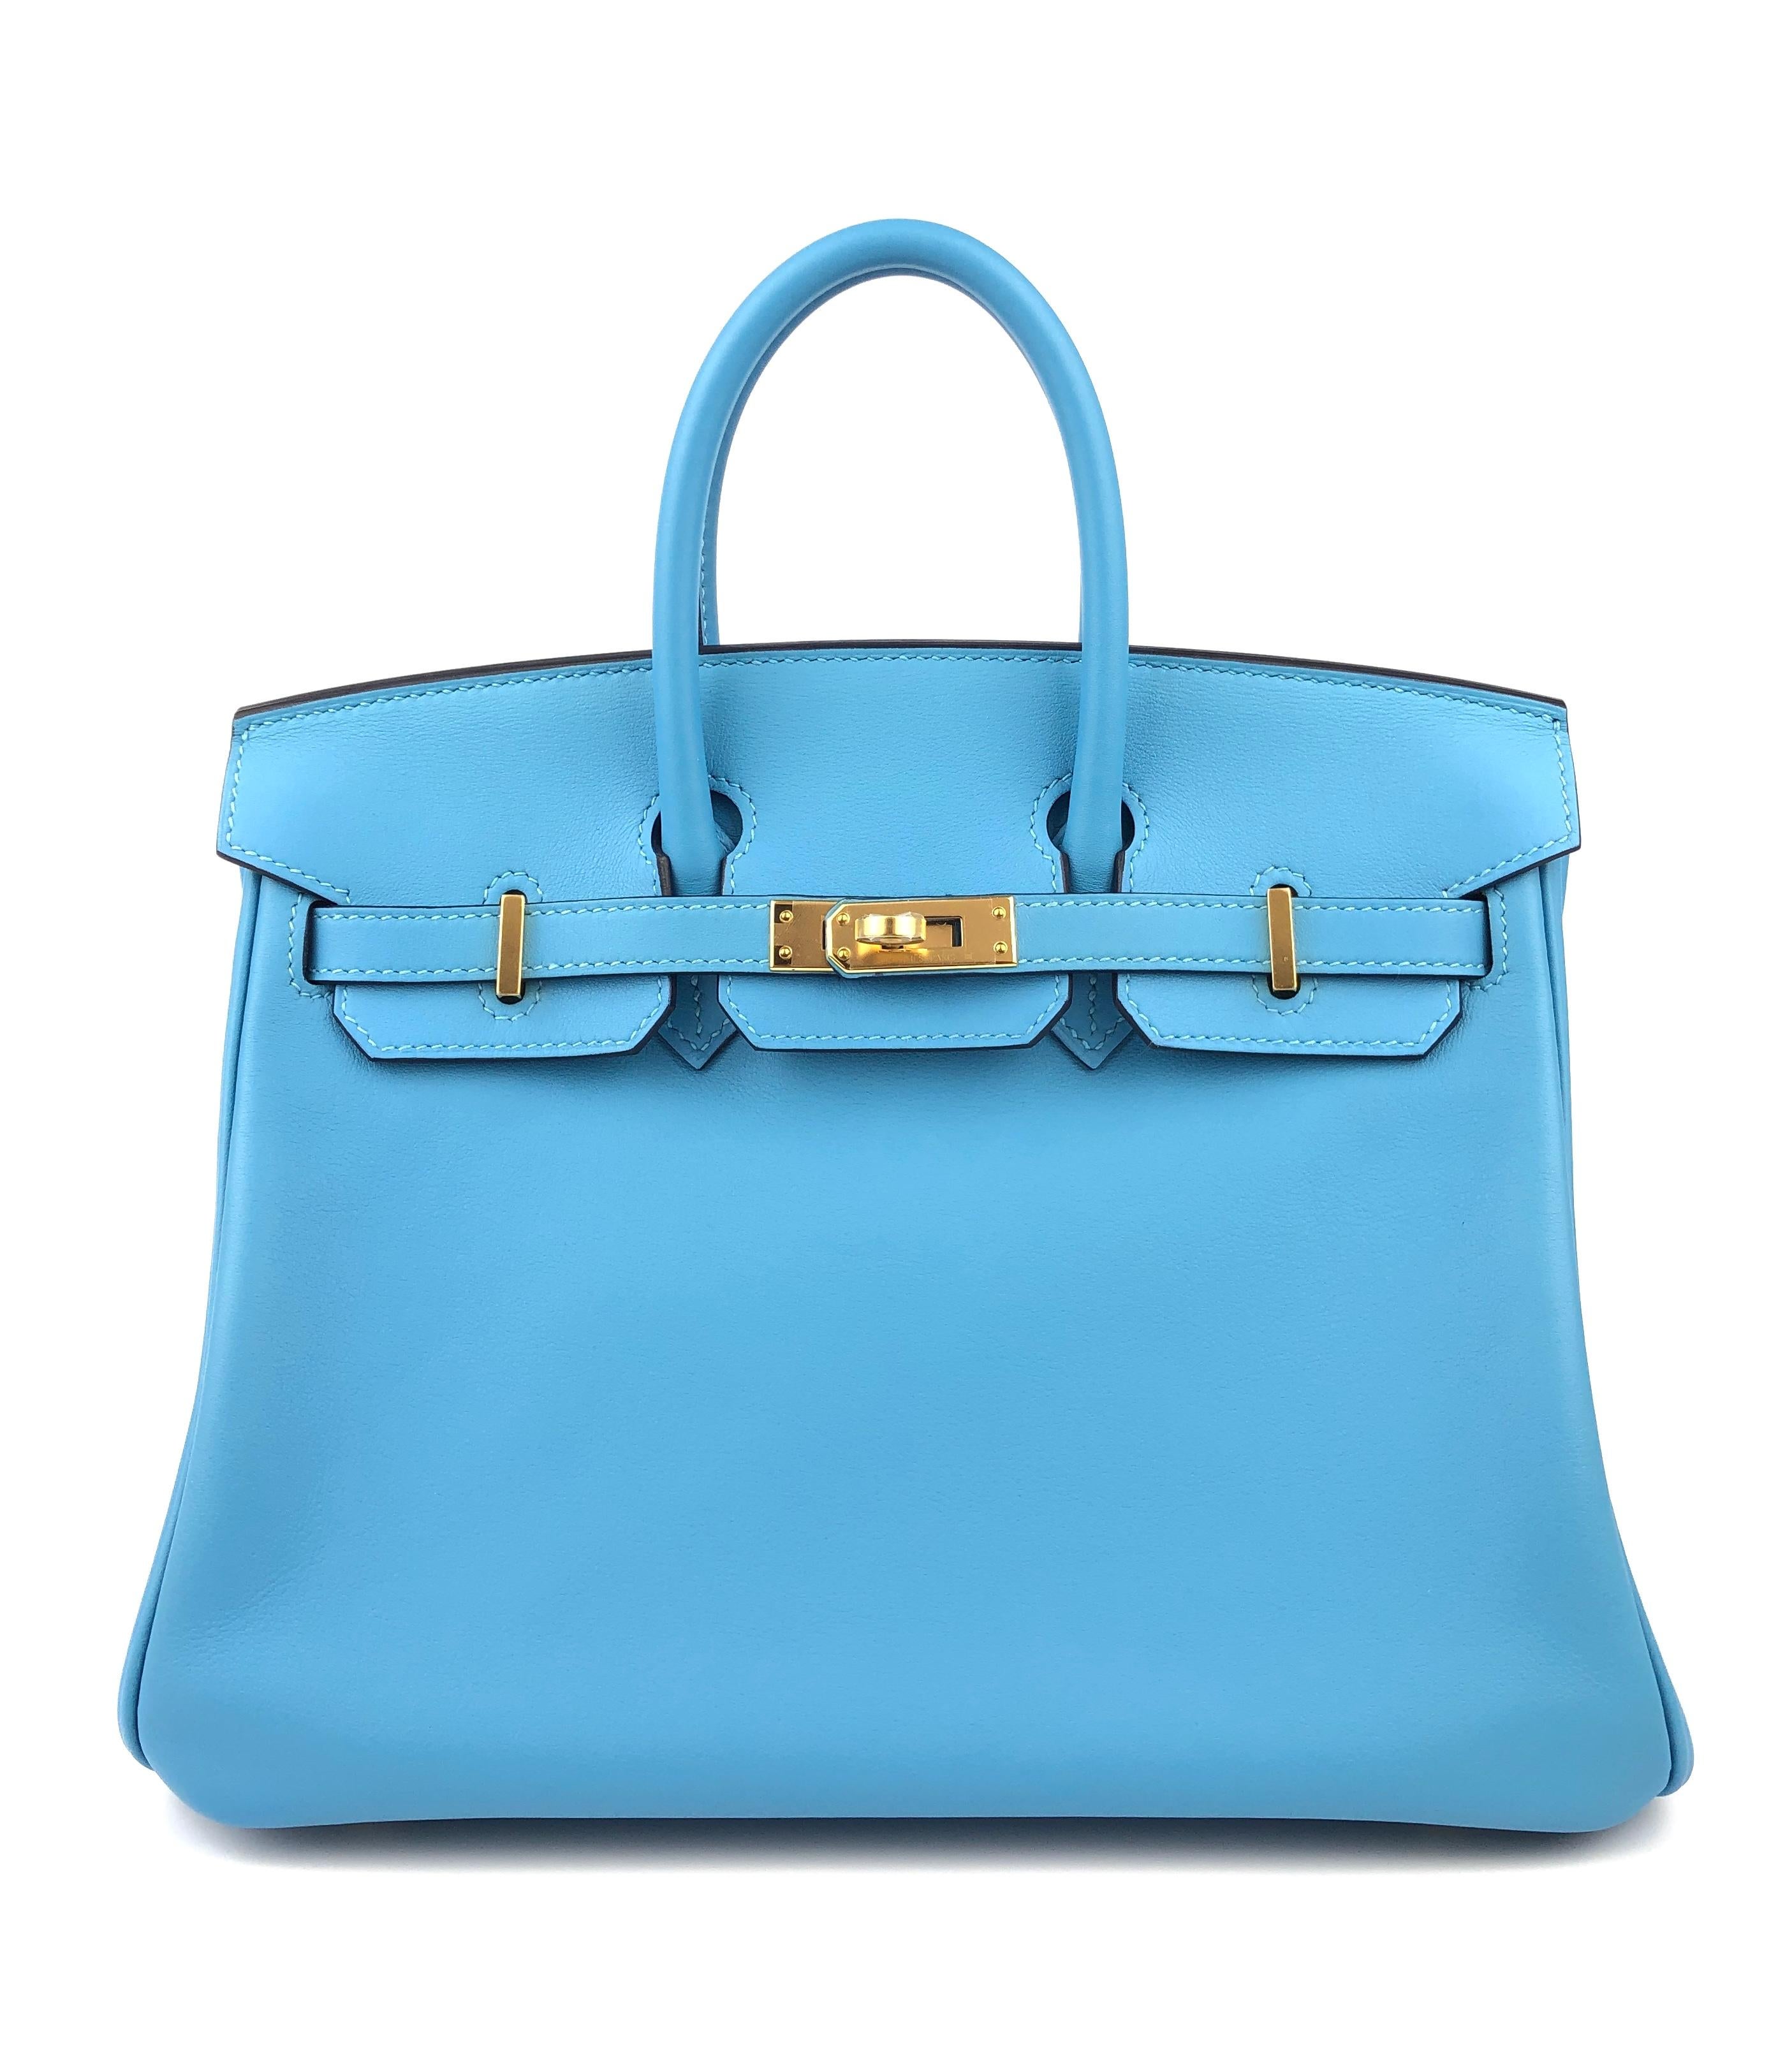 ery Rare and the Only ONE on eBay! Hermes Birkin 25 Bleu du Nord Leather Gold Hardware. As New with Plastic on Hardware and feet, perfect corners and structure. 

Shop With Confidence from Lux Addicts. Authenticity Guaranteed!